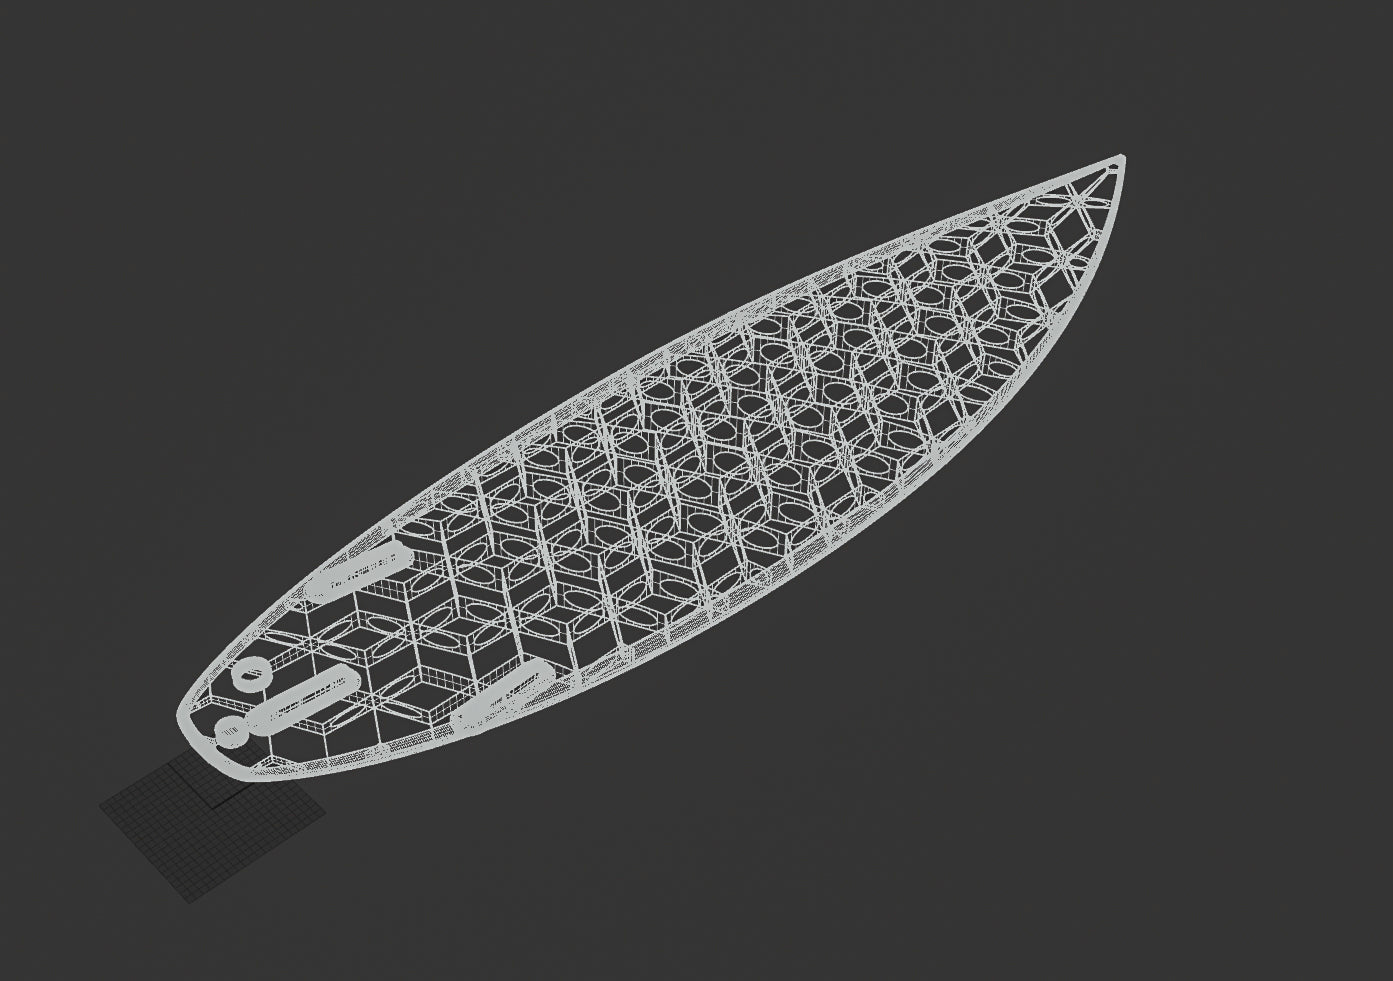 3D Printed Surfboard - Wyve - 4D Core technologie